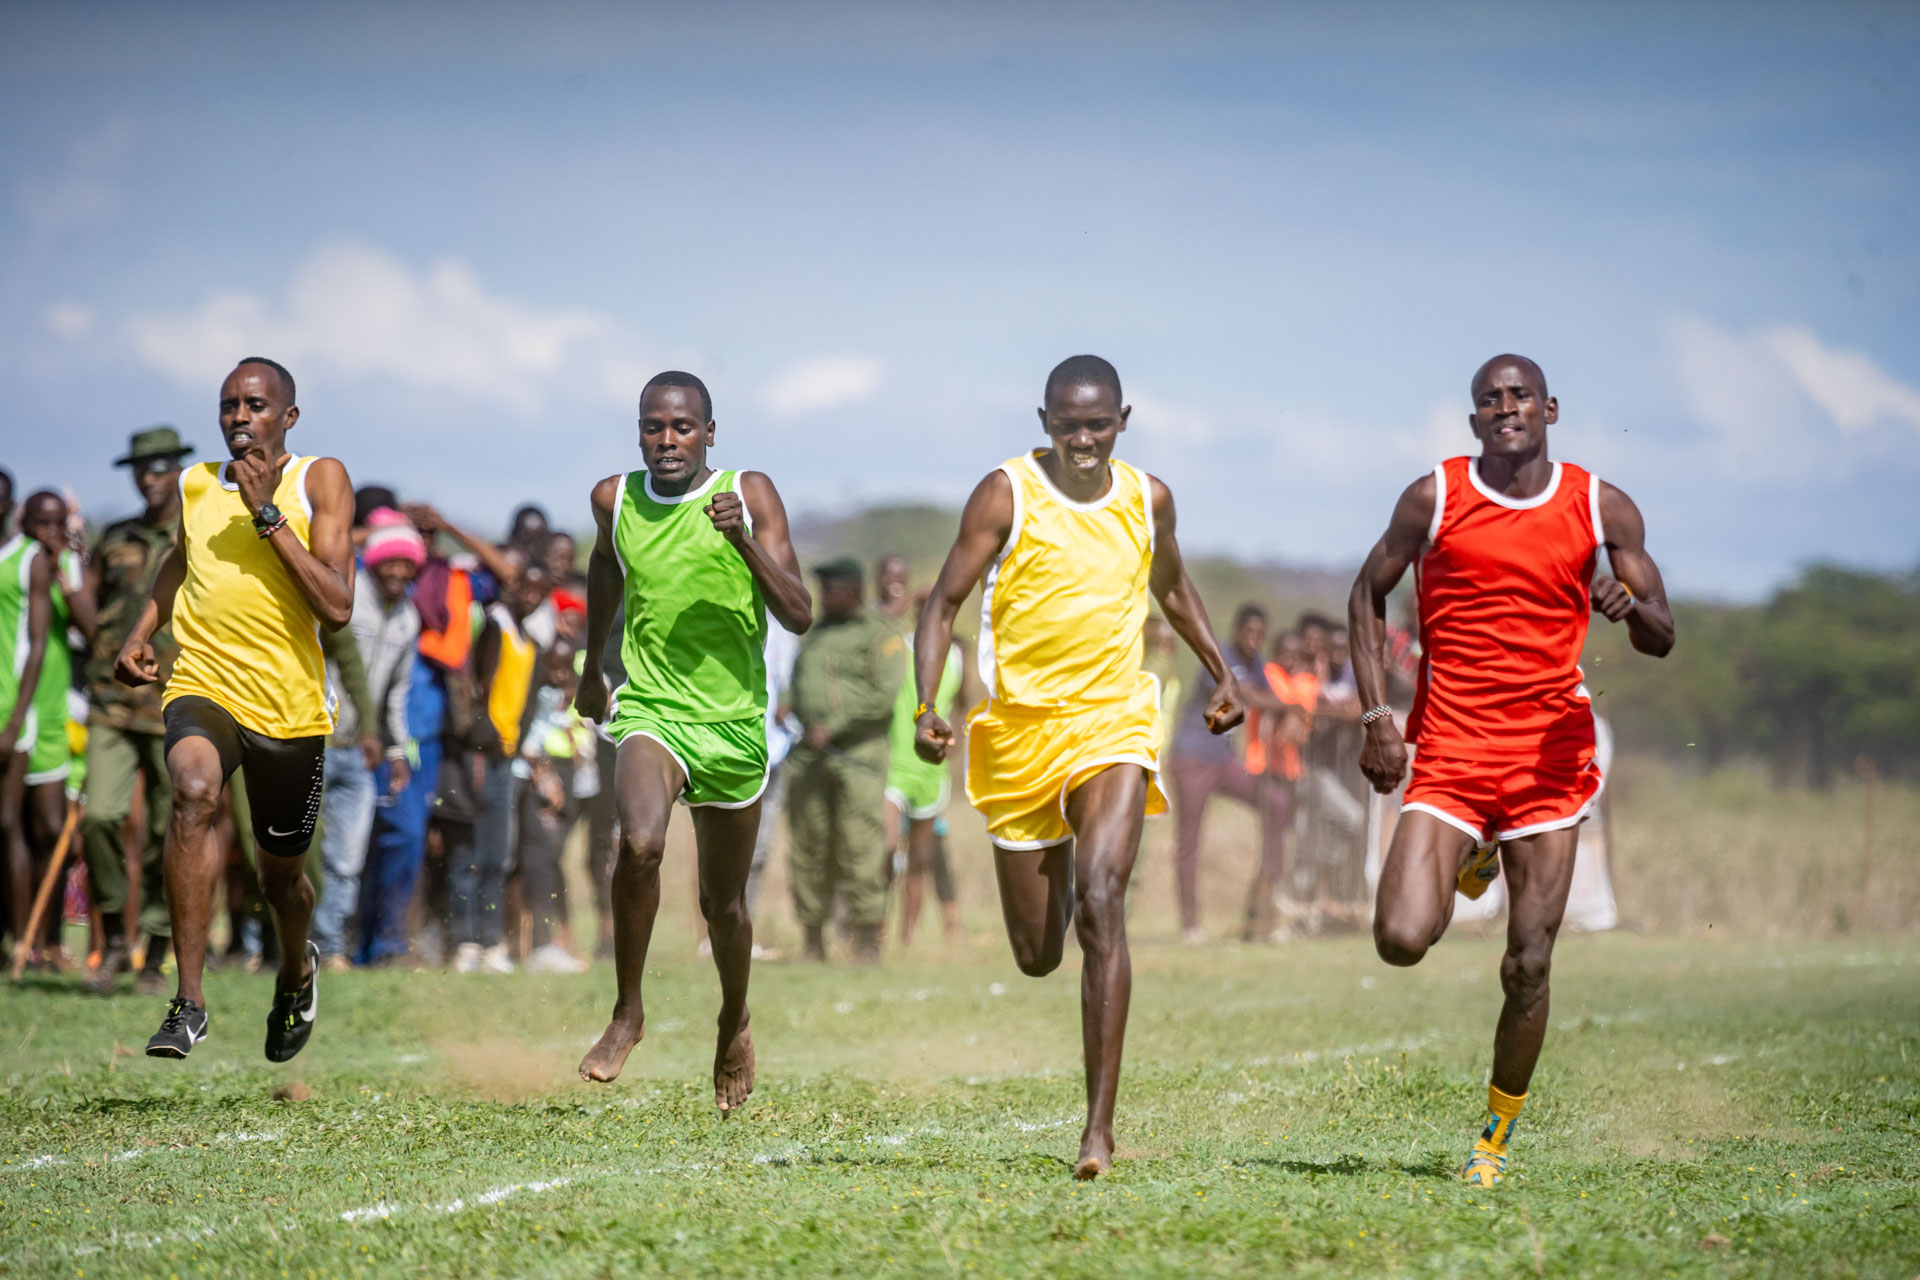 It was easy to see why Kenyans are world-renowned runners